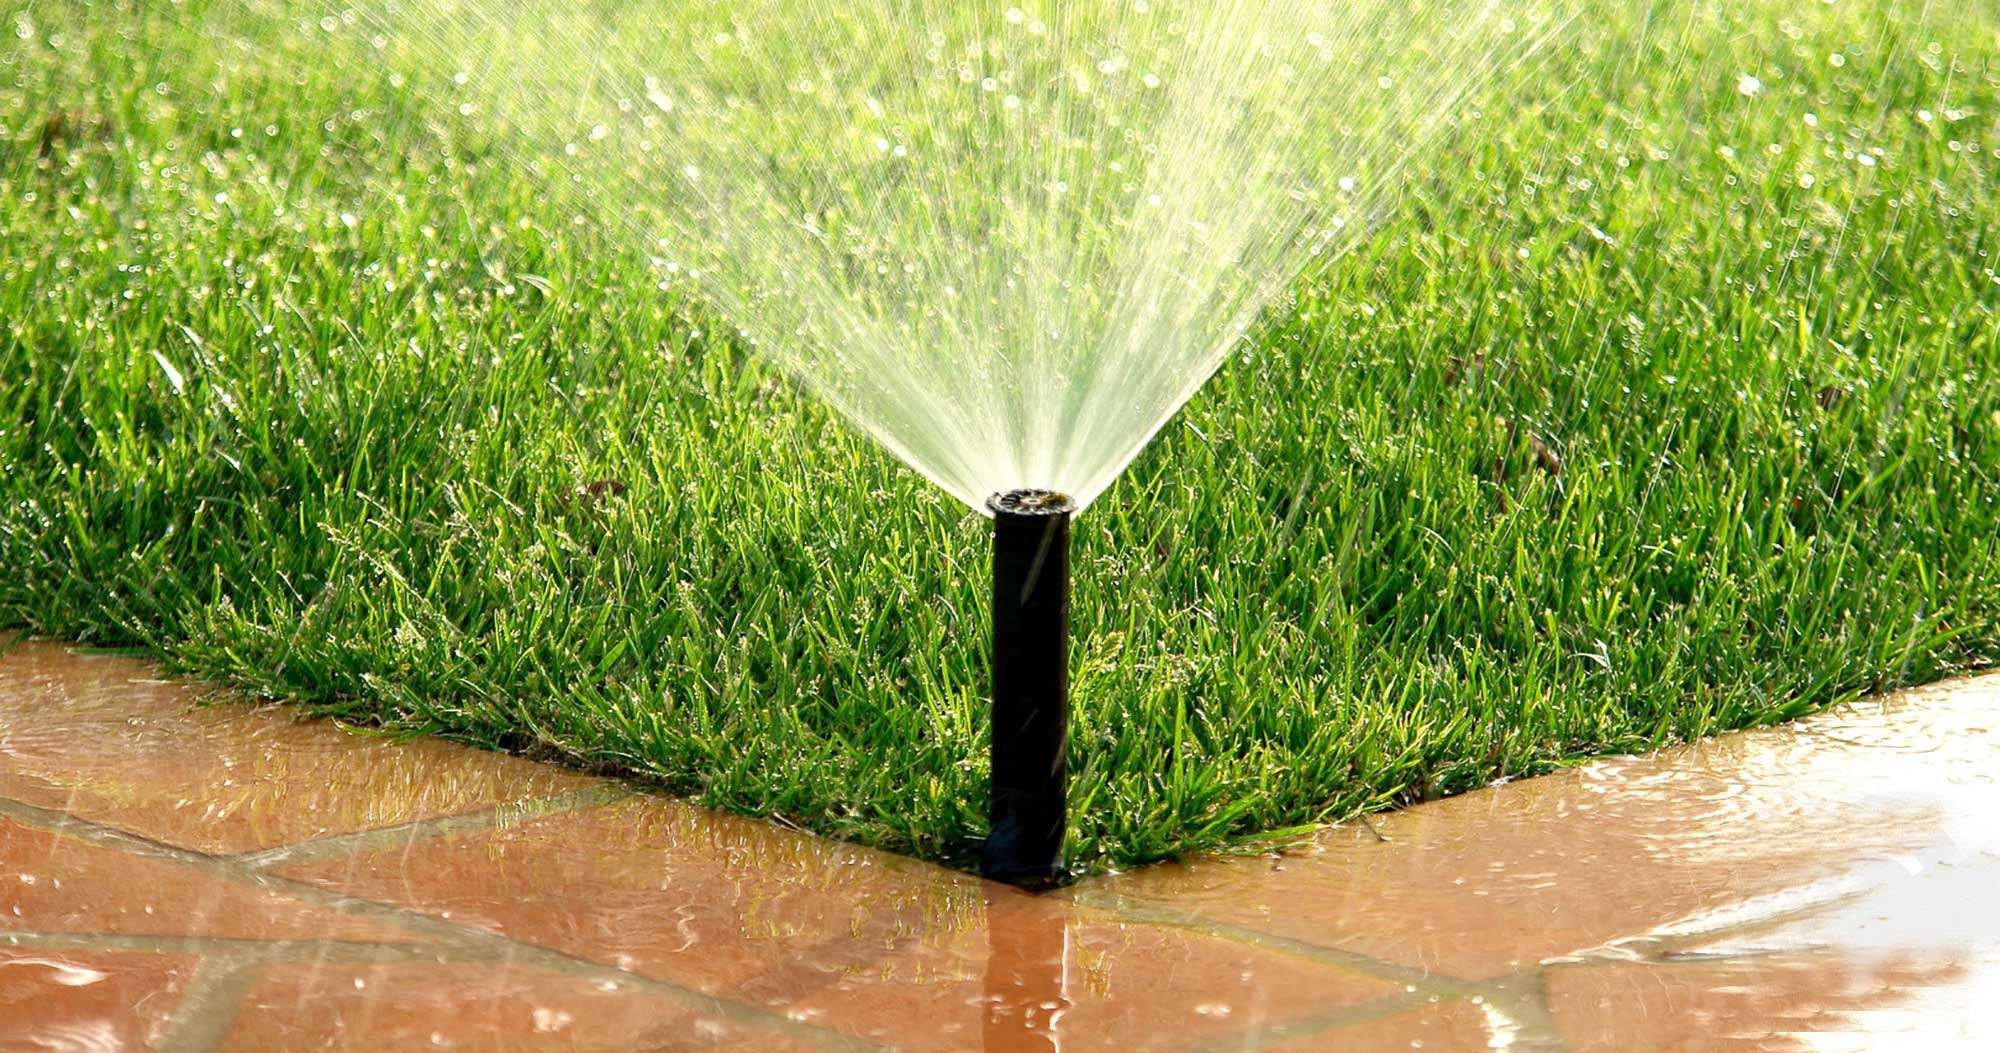 What effect will you get when you use an irrigation system on your lawn?